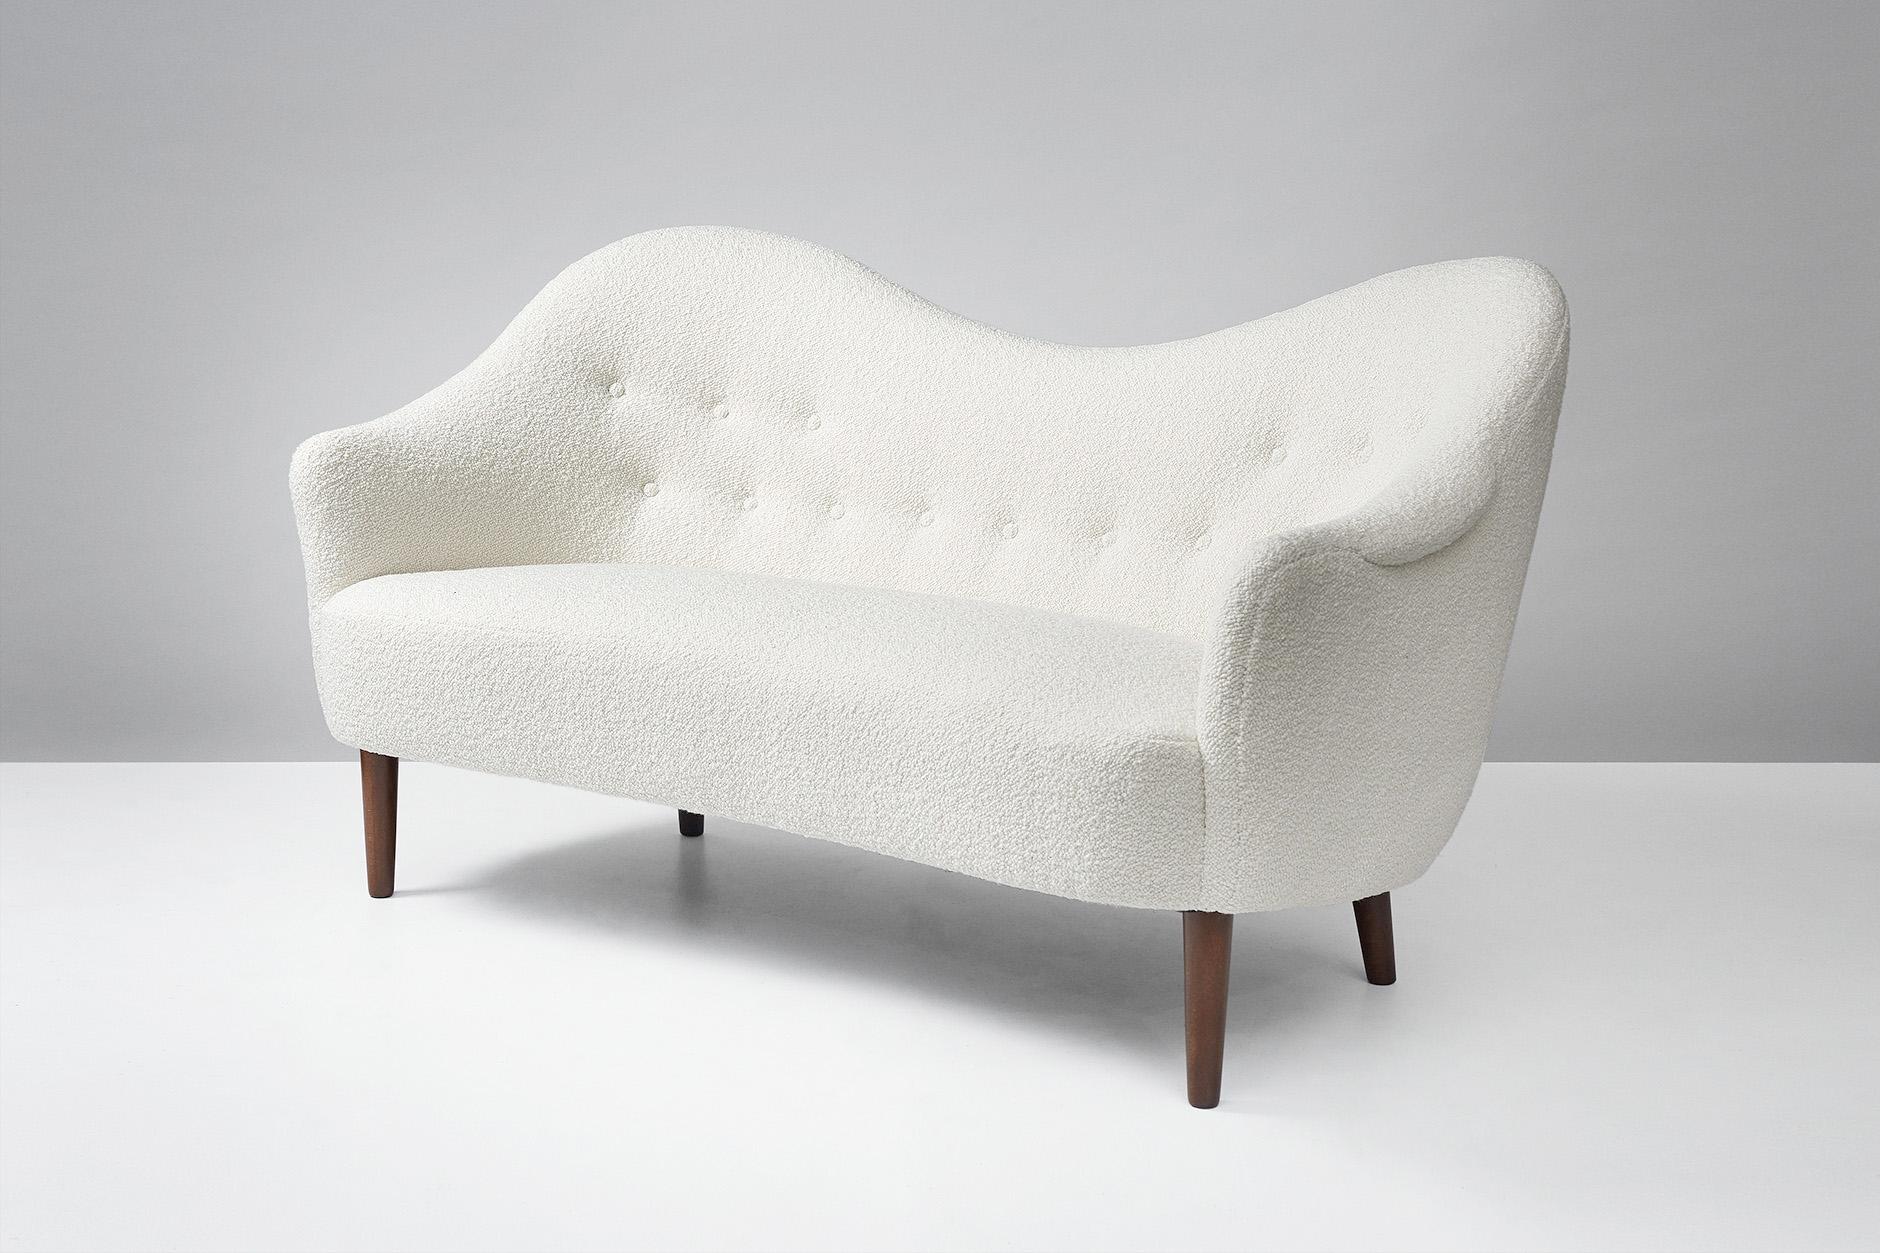 Carl Malmsten 'Samspel' sofa

First designed in 1956 and produced by AB Record, Bollnas, Sweden. This example has been reupholstered in luxurious bouclé wool fabric from Dedar, Milan. Stained beech legs.